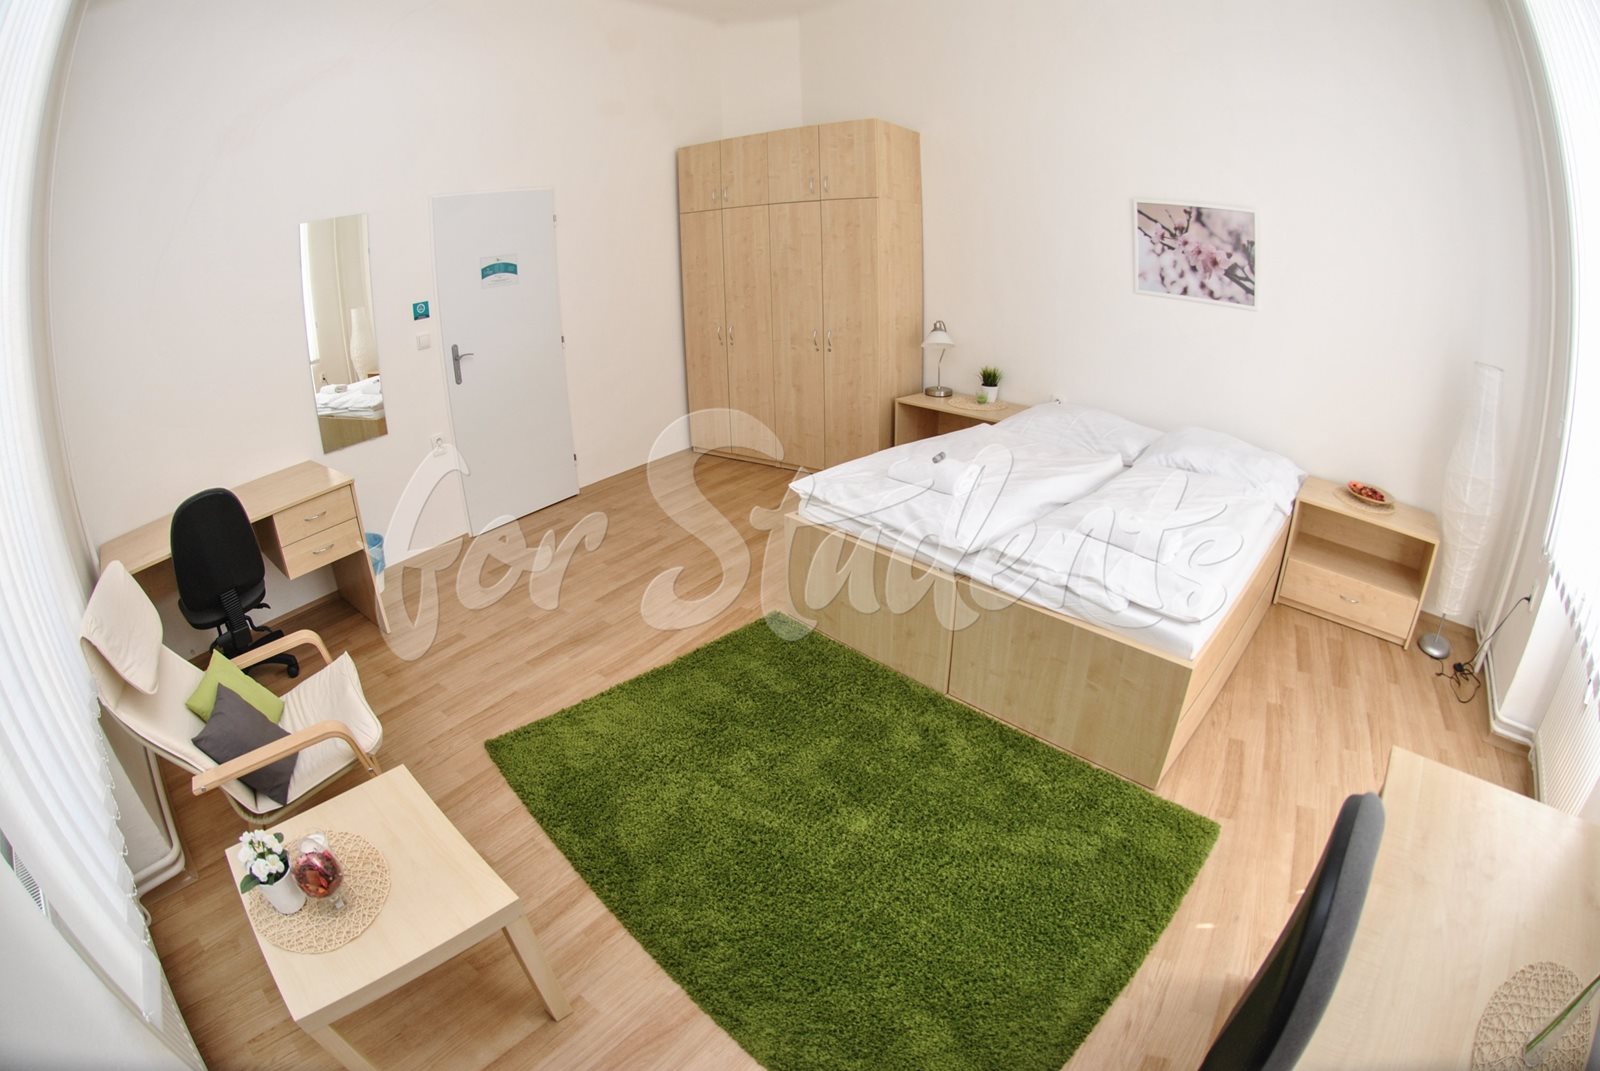 Place in a shared double room in the Brno city centre